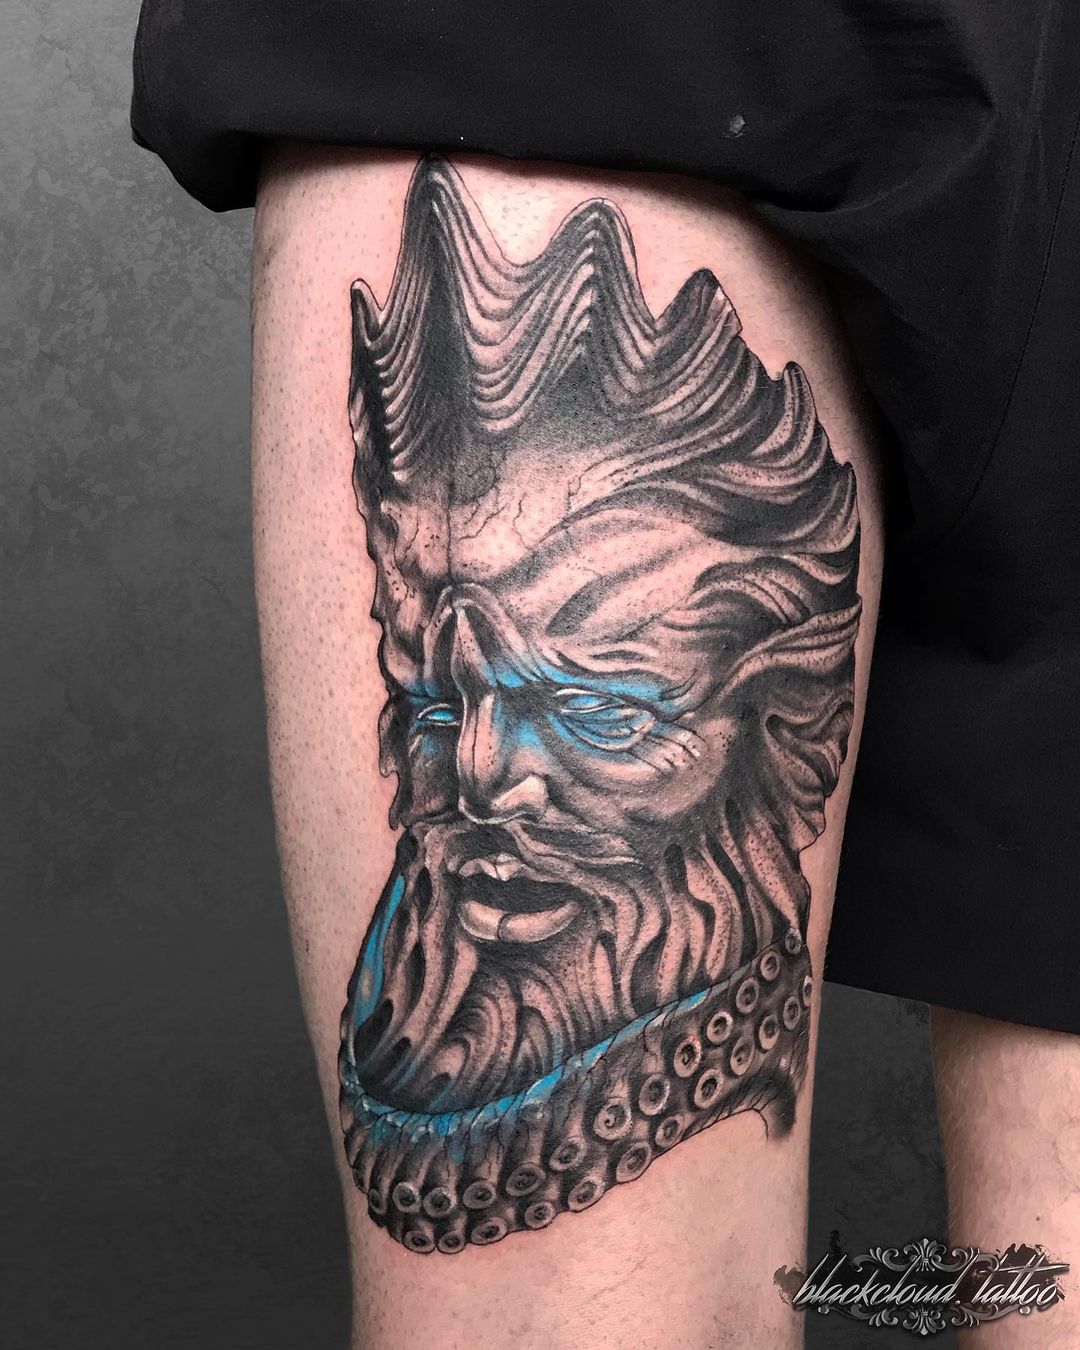 The water God is a great tattoo for a mythological piece.